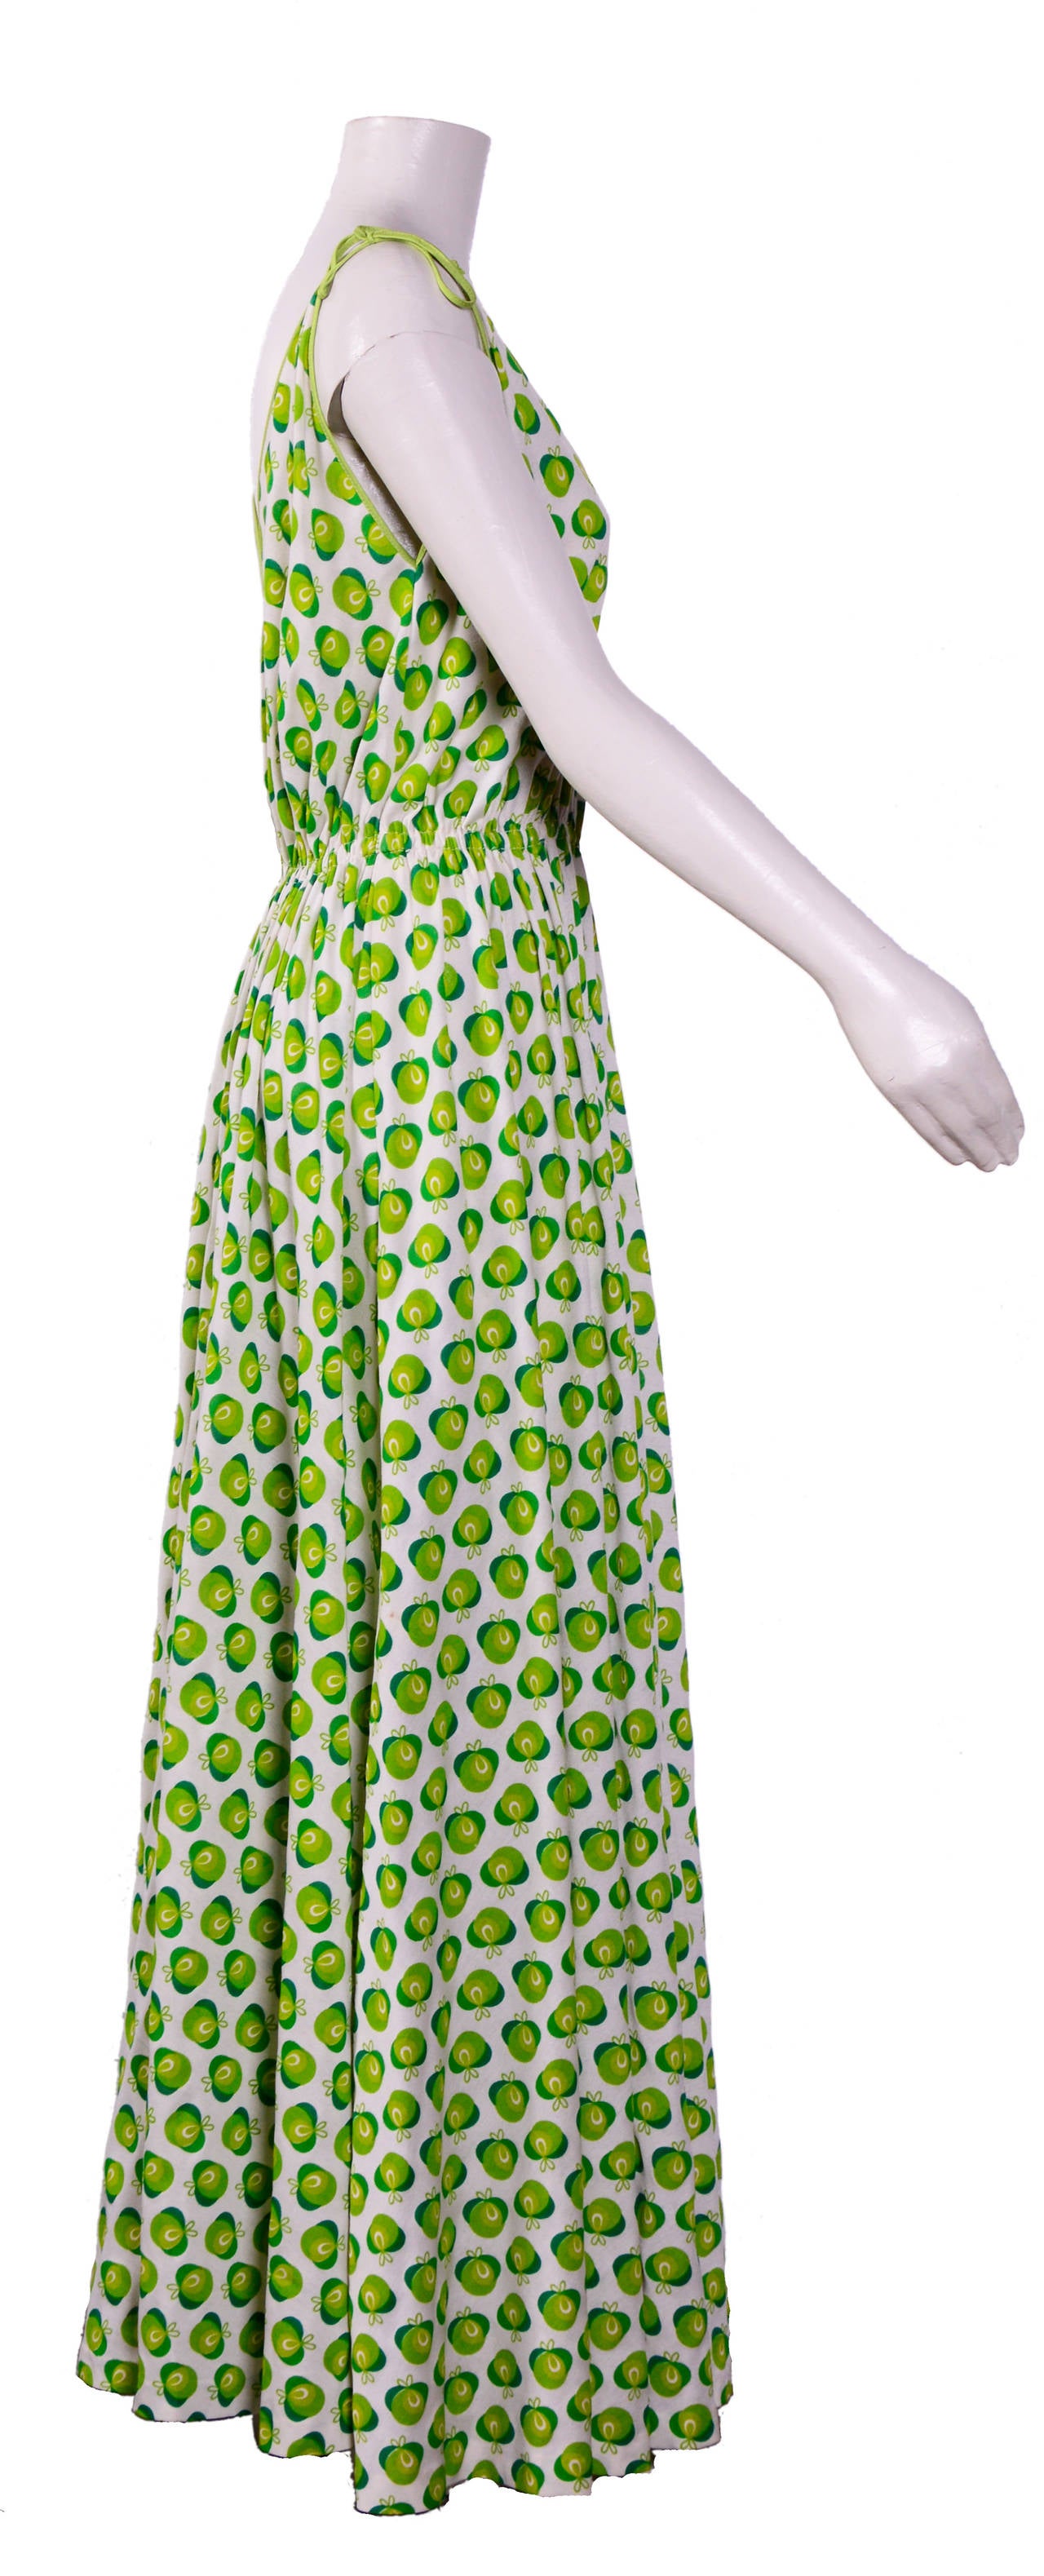 Gorgeous Miss Dior vintage mixed Cotton green apple print summer dress.
Measurements taken flat in inches
UA to UA 8